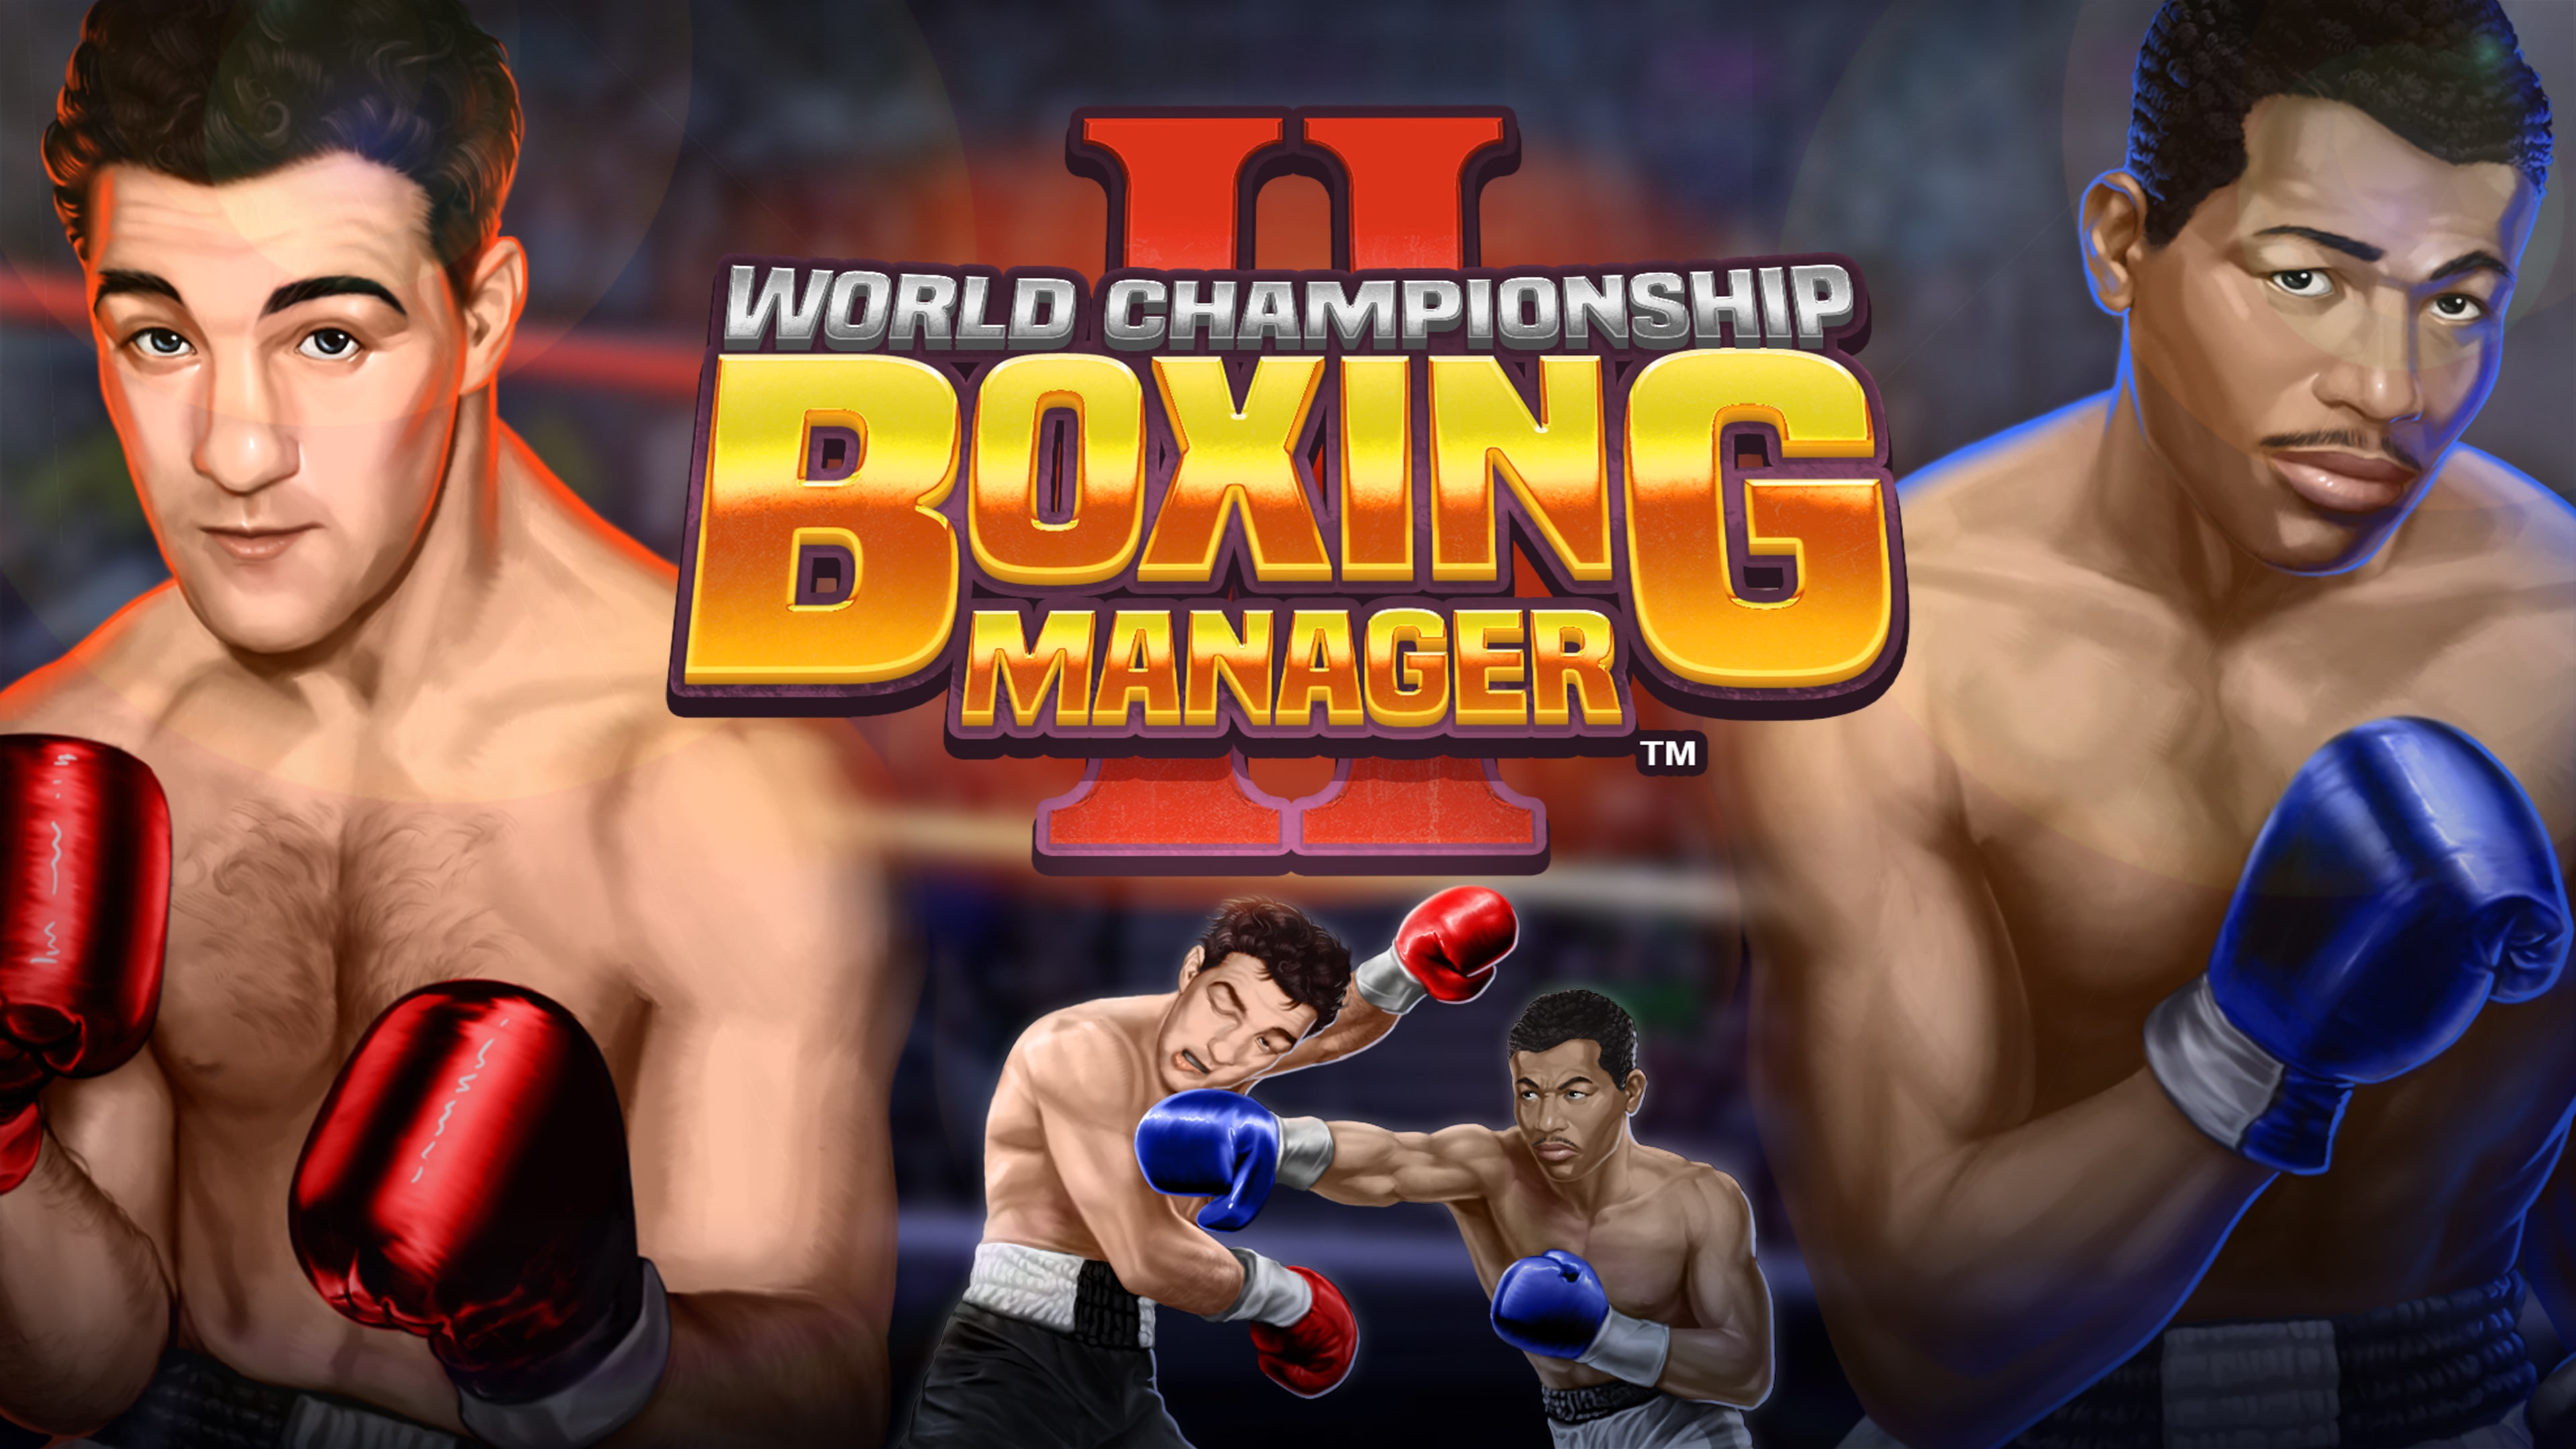 World Championship Boxing Manager 2 - IGN